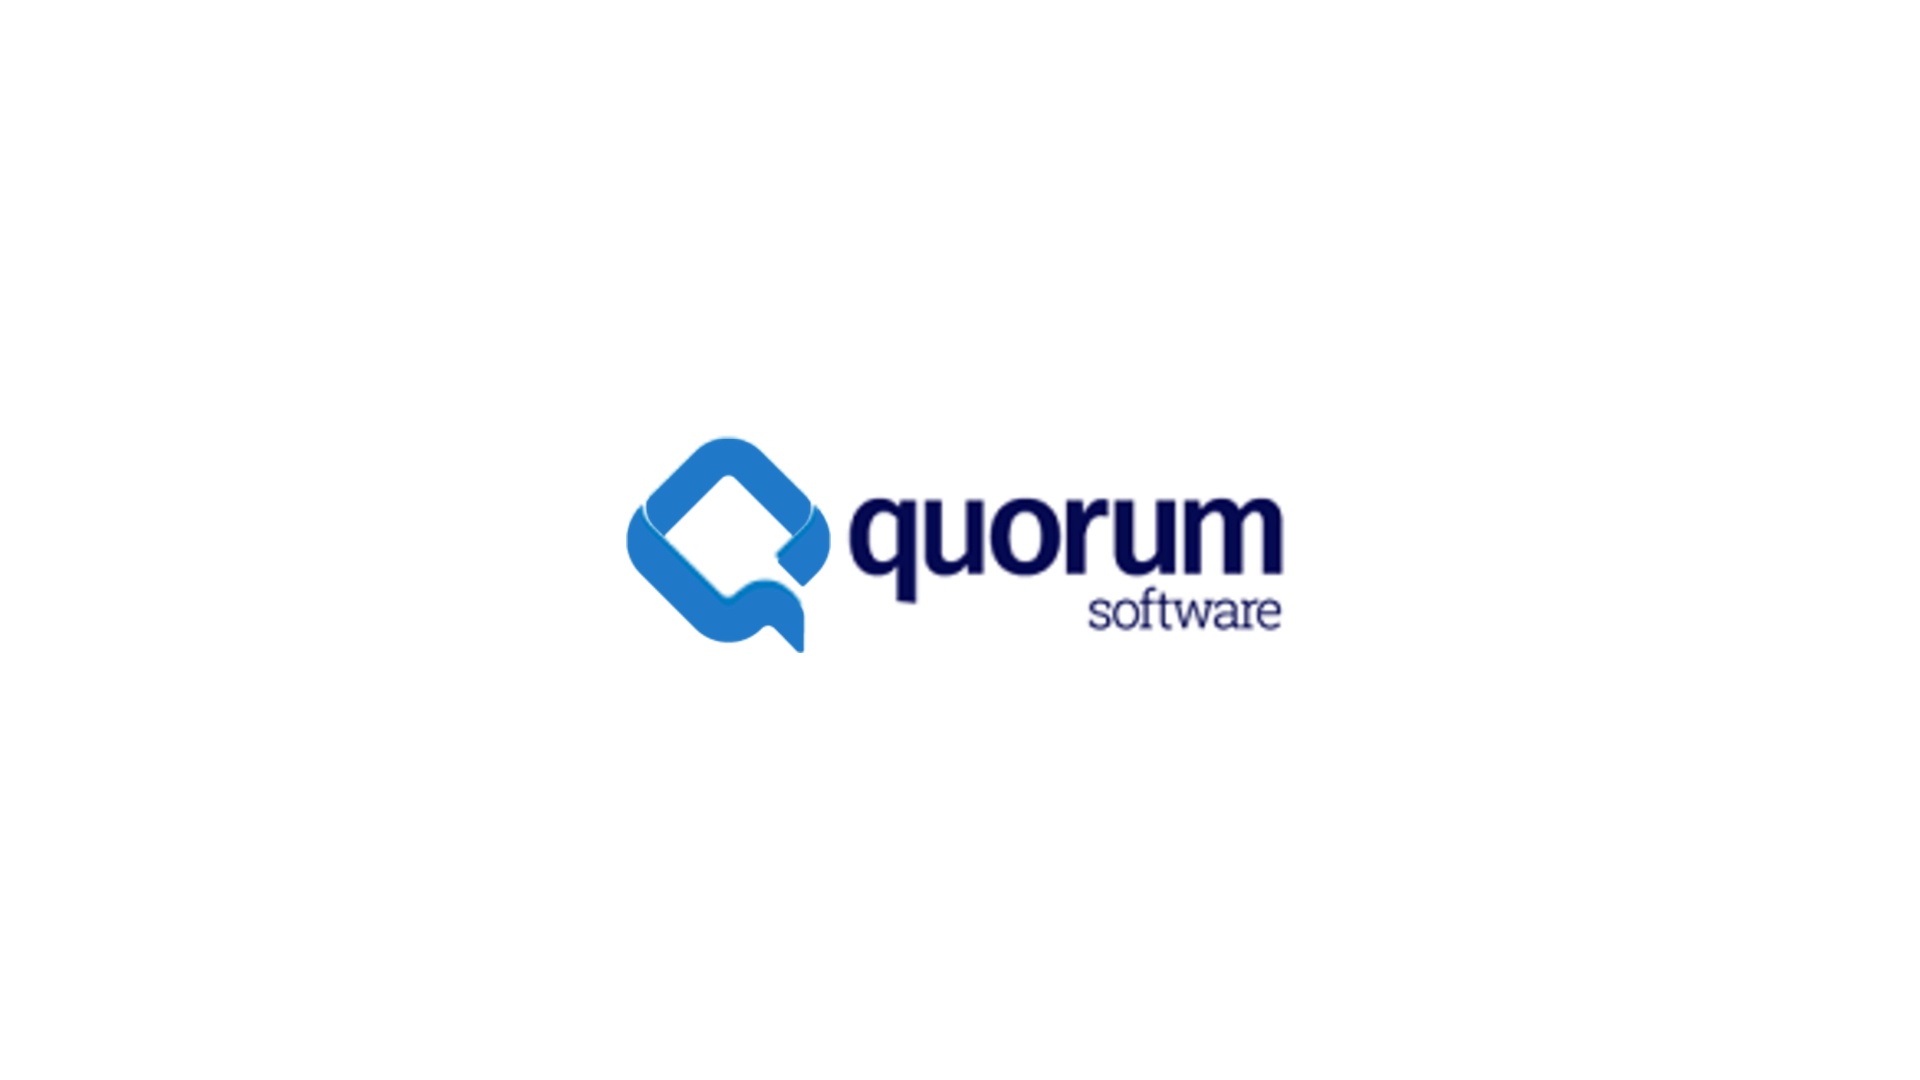 Quorum Software Sees Strong Adoption of Fully-Integrated, Cloud-Based Document Management